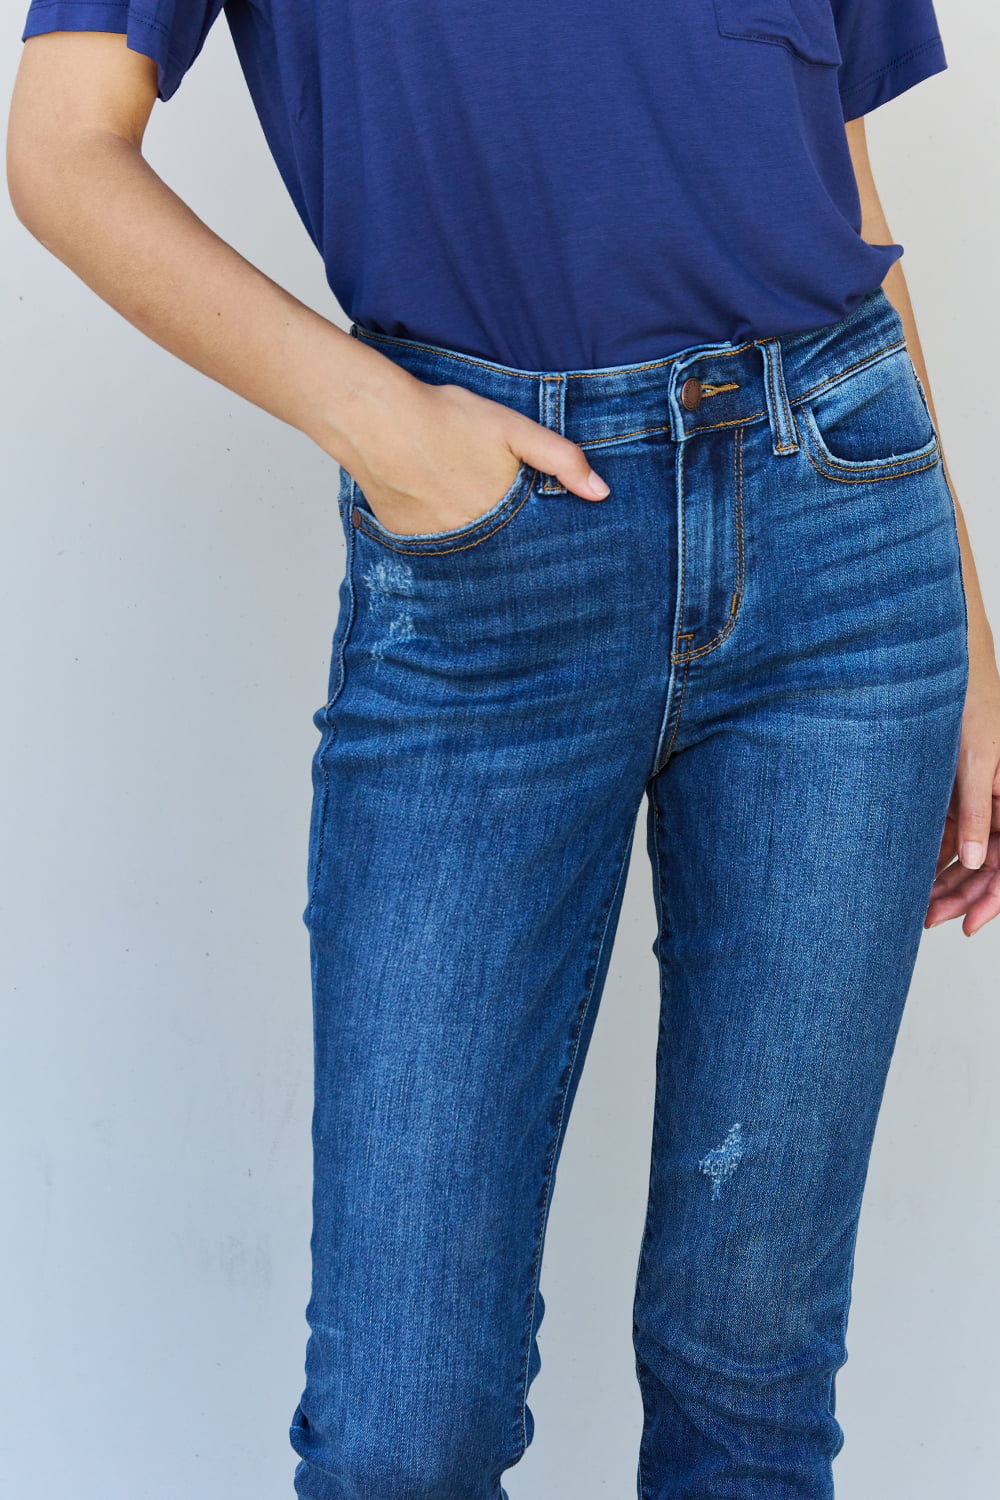 Judy Blue Aila Short Full Size Mid Rise Cropped Relax Fit Jeans Jeans JT's Designer Fashion